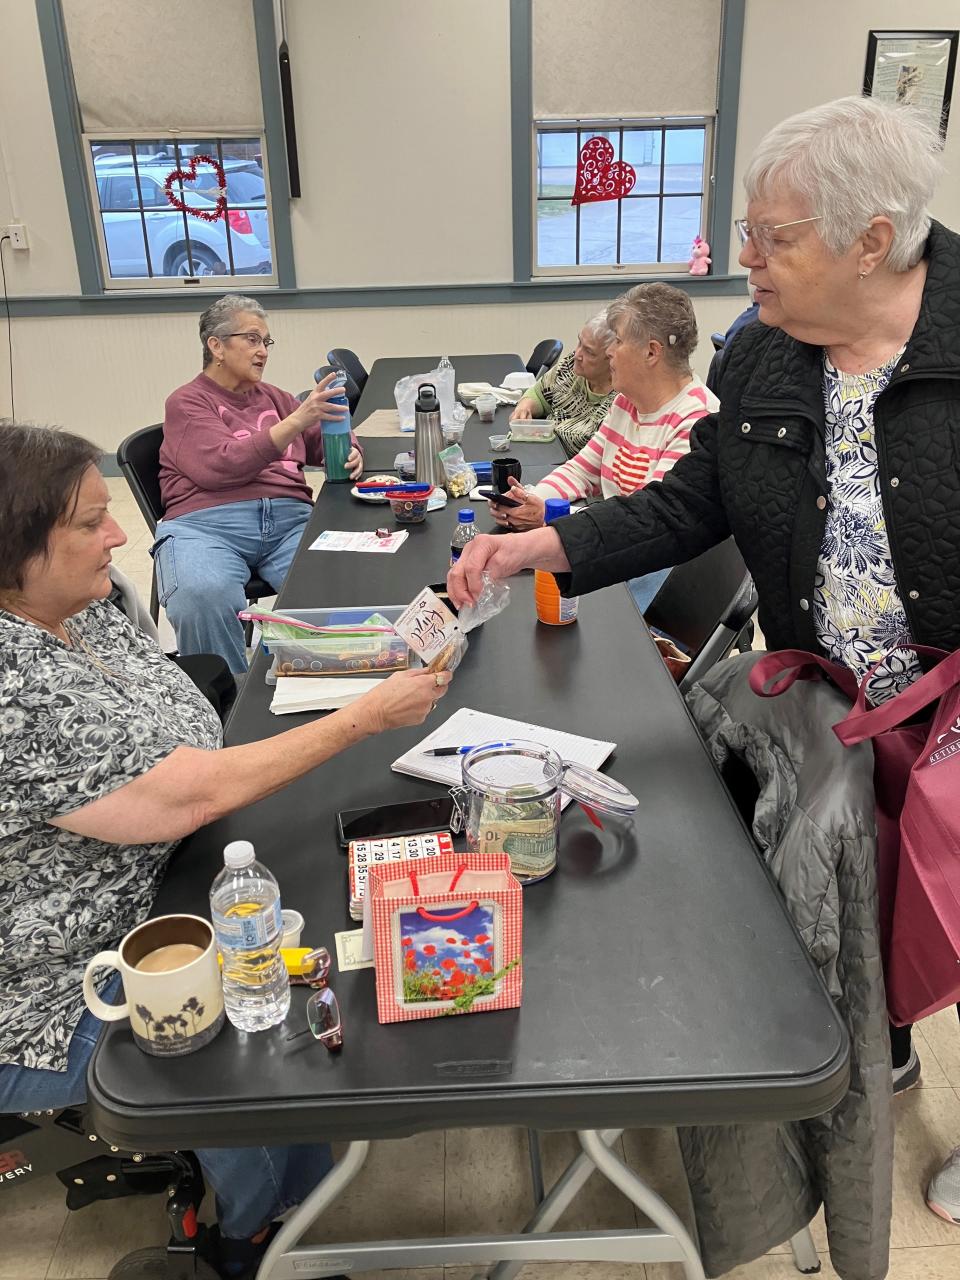 Residents from Primrose Retirement Community recently visited the Lexington Senior Center to hand out cookies and restaurant gift cards. It's one of a number of ways Primrose residents are giving back to the community.